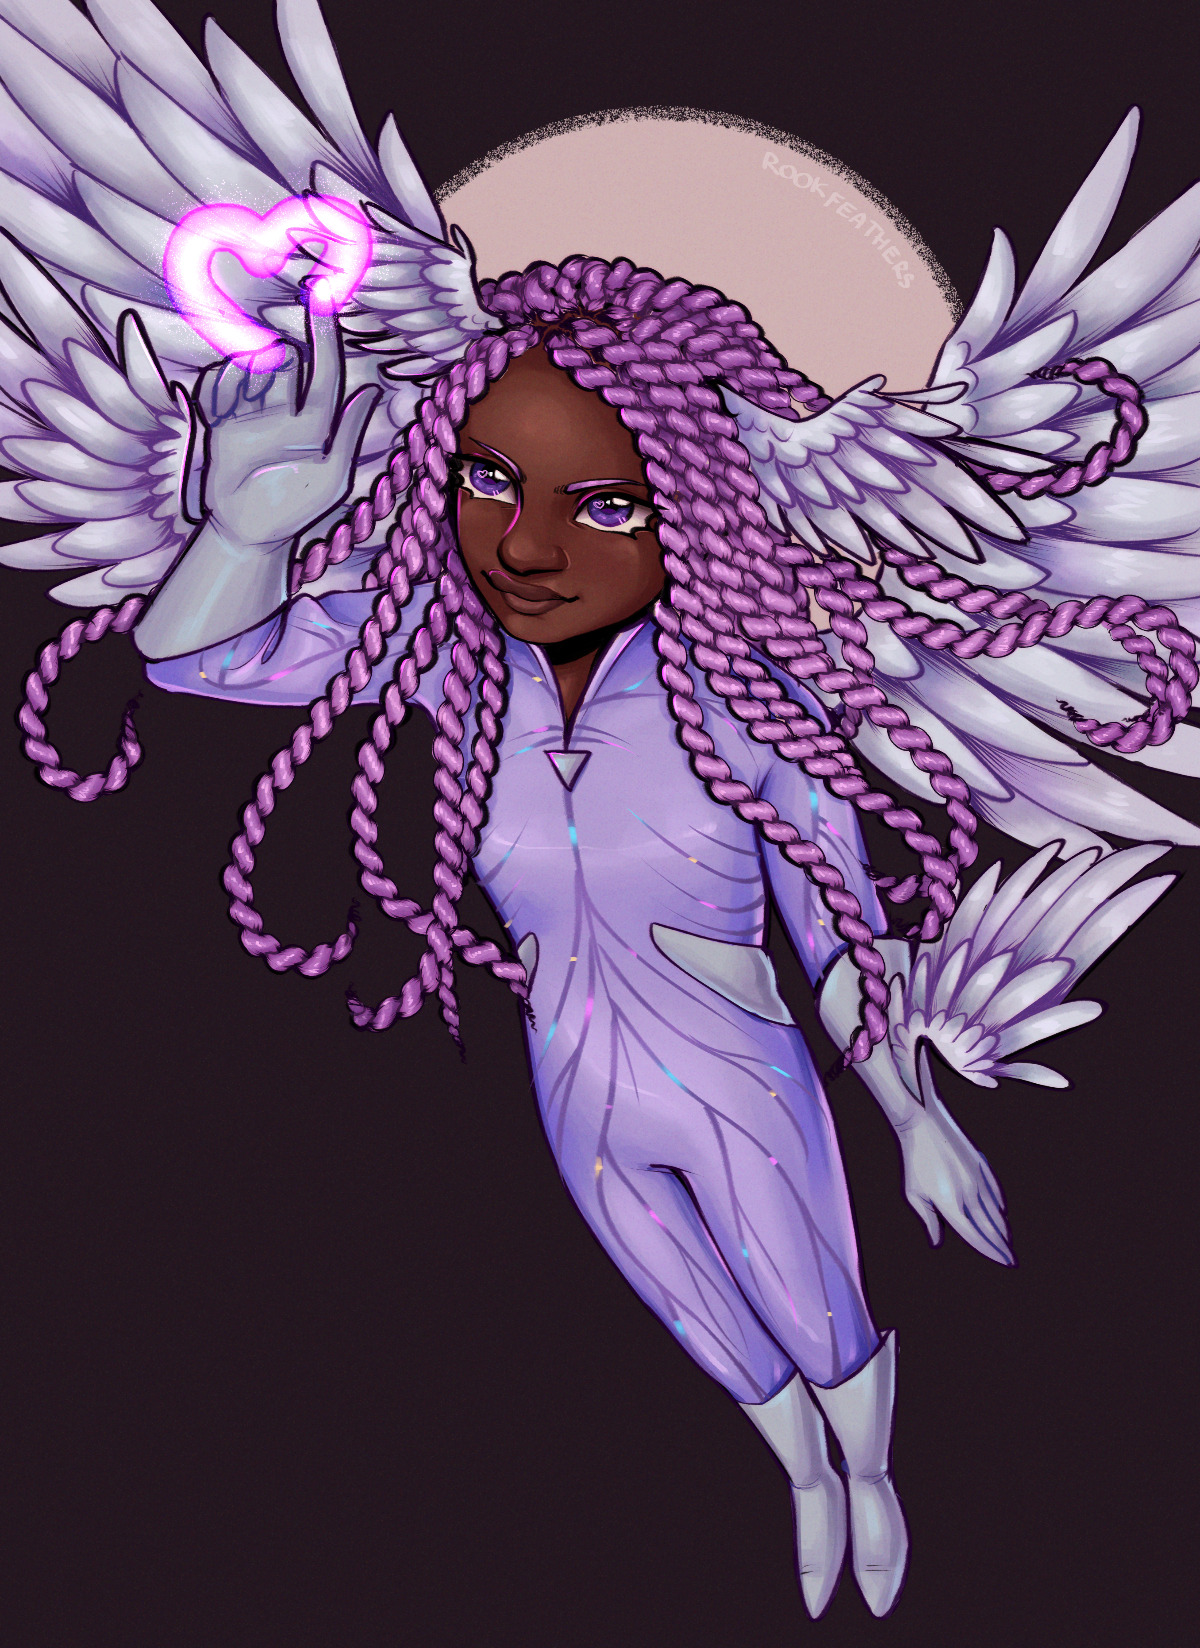 A dark-skinned young woman with a purple flight suit and pink hair styled into twists